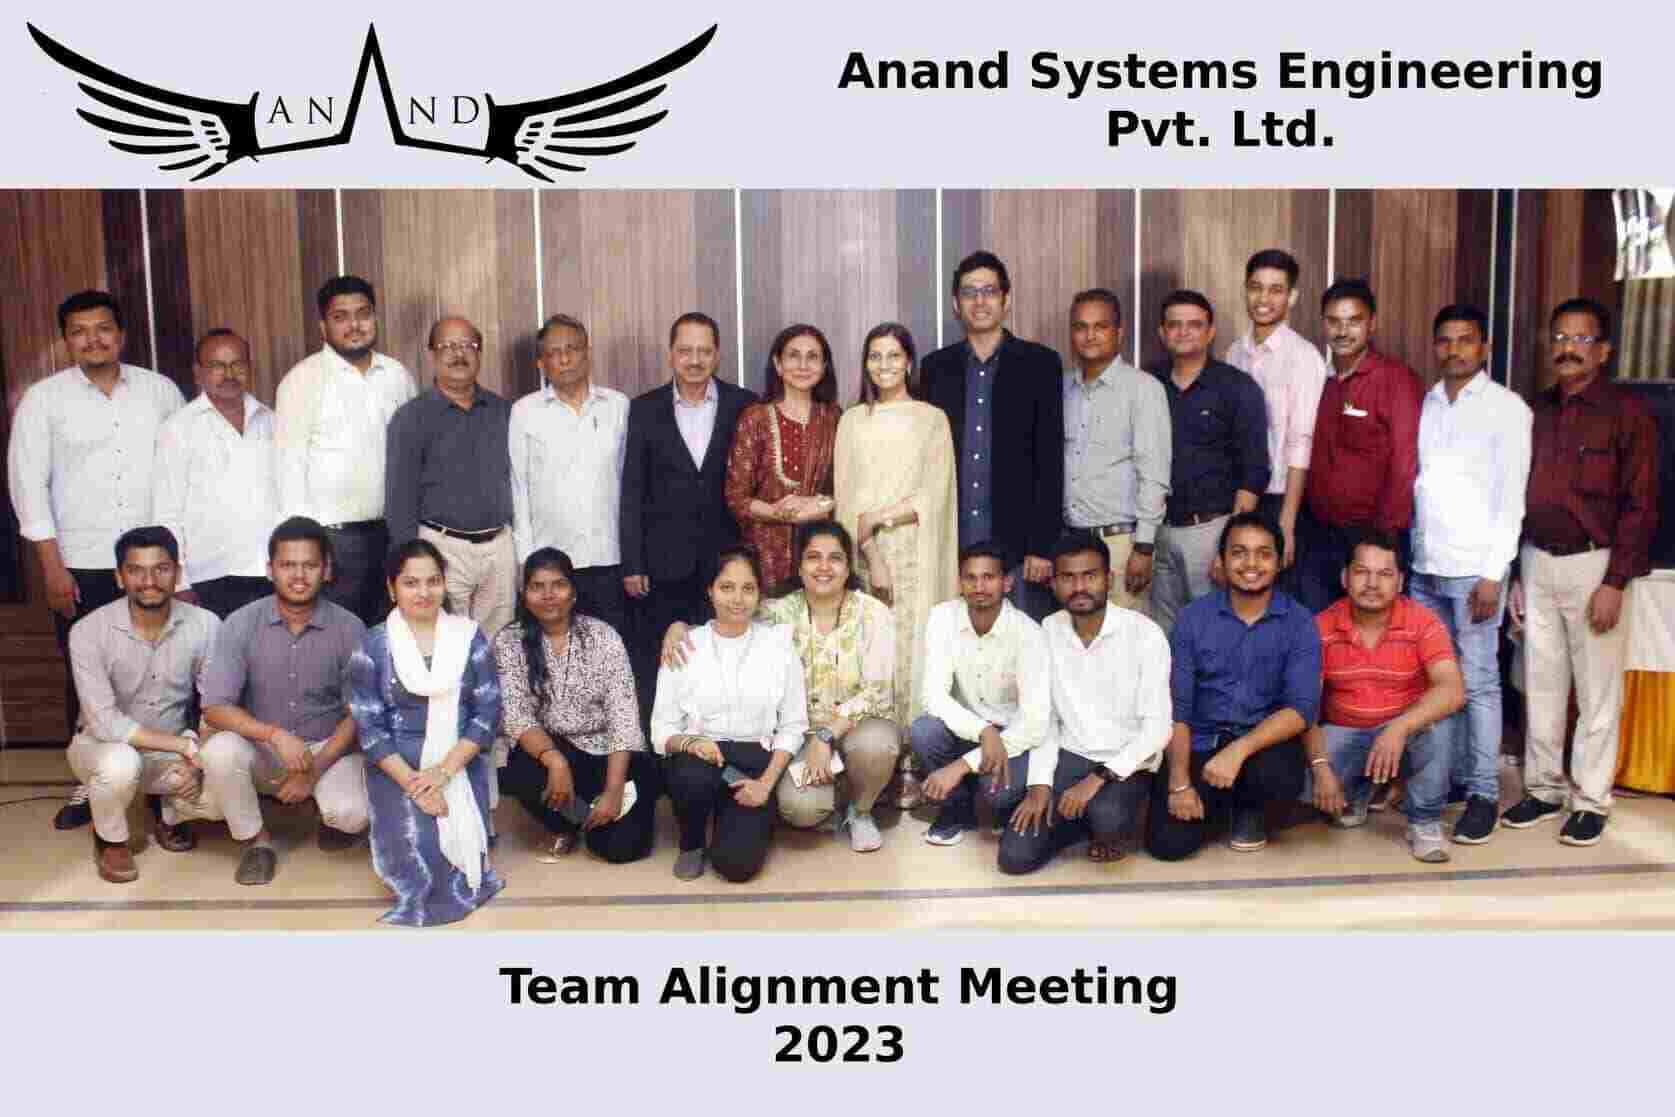 Anand Systems Engineering Team